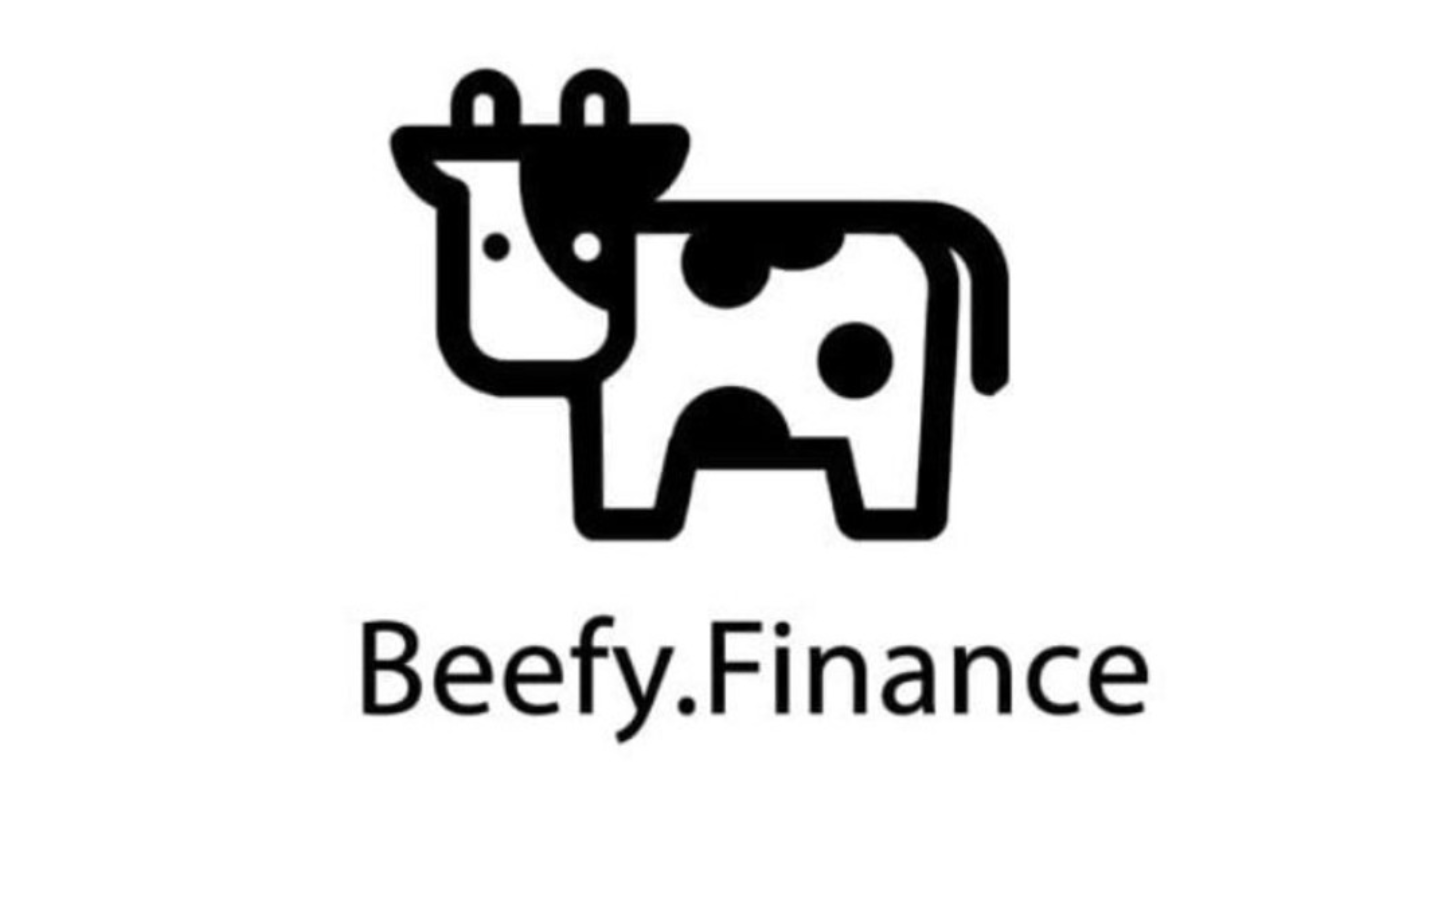 How to Buy Beefy.Finance Coin?